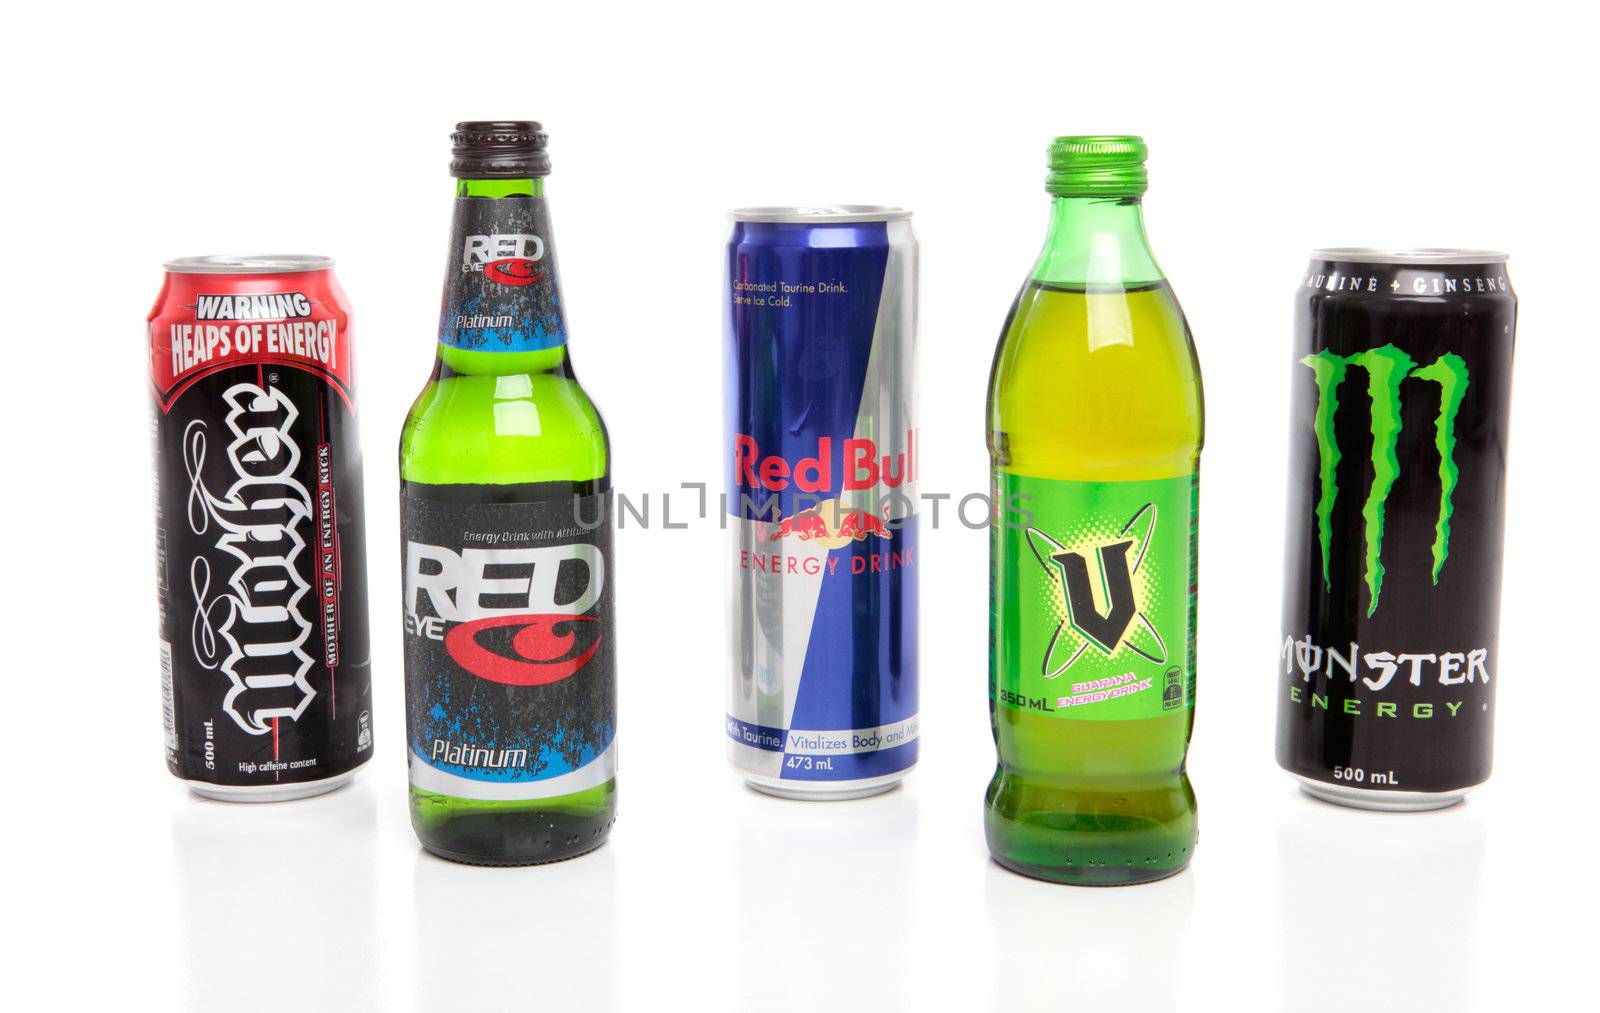 Varieties of Energy drinks on a white background.  Brands include Mother, V, Red Bull, Red Eye, Monster. EDITORIAL USE ONLY.